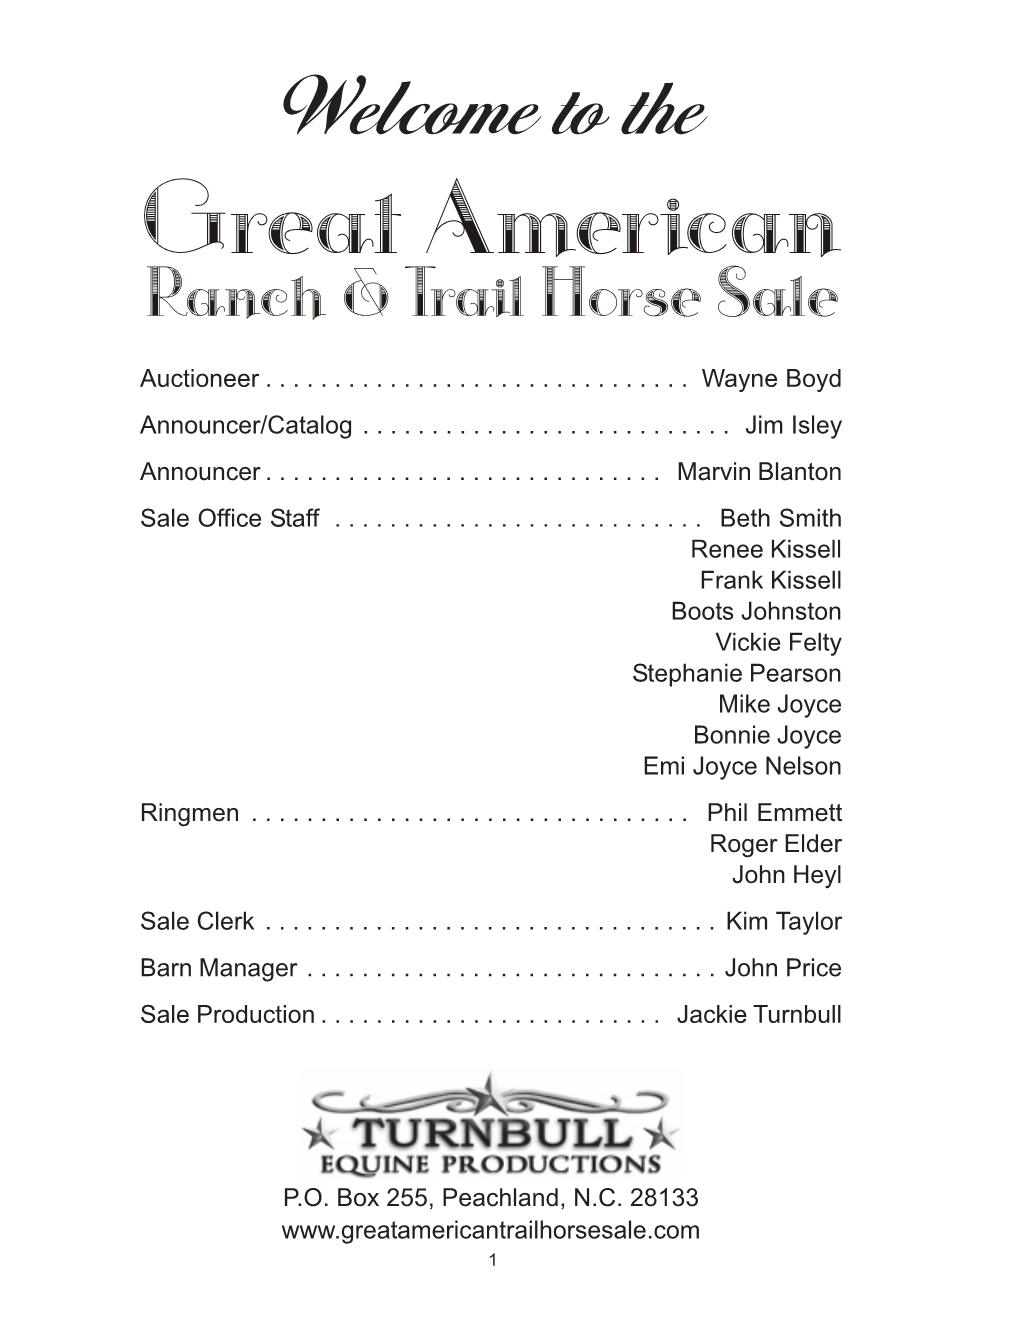 Great American Ranch & Trail Horse Sale